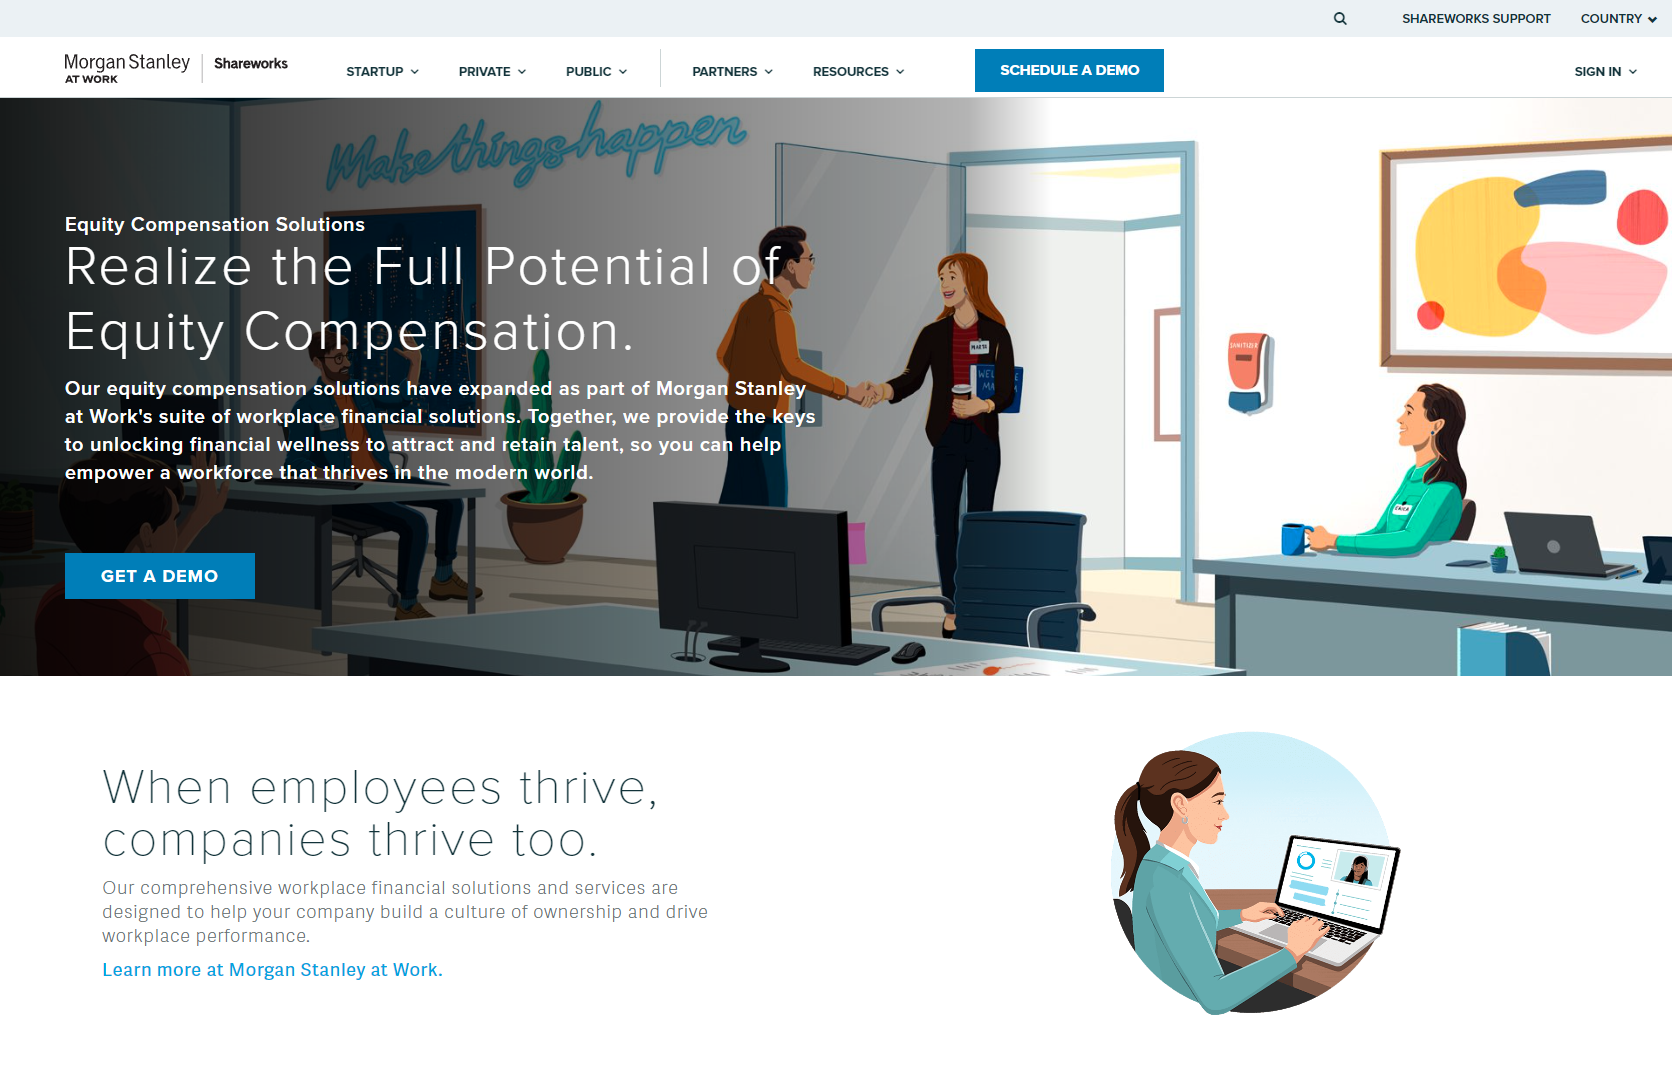 Image alt: Shareworks is a coprehensive workplace financial solution.